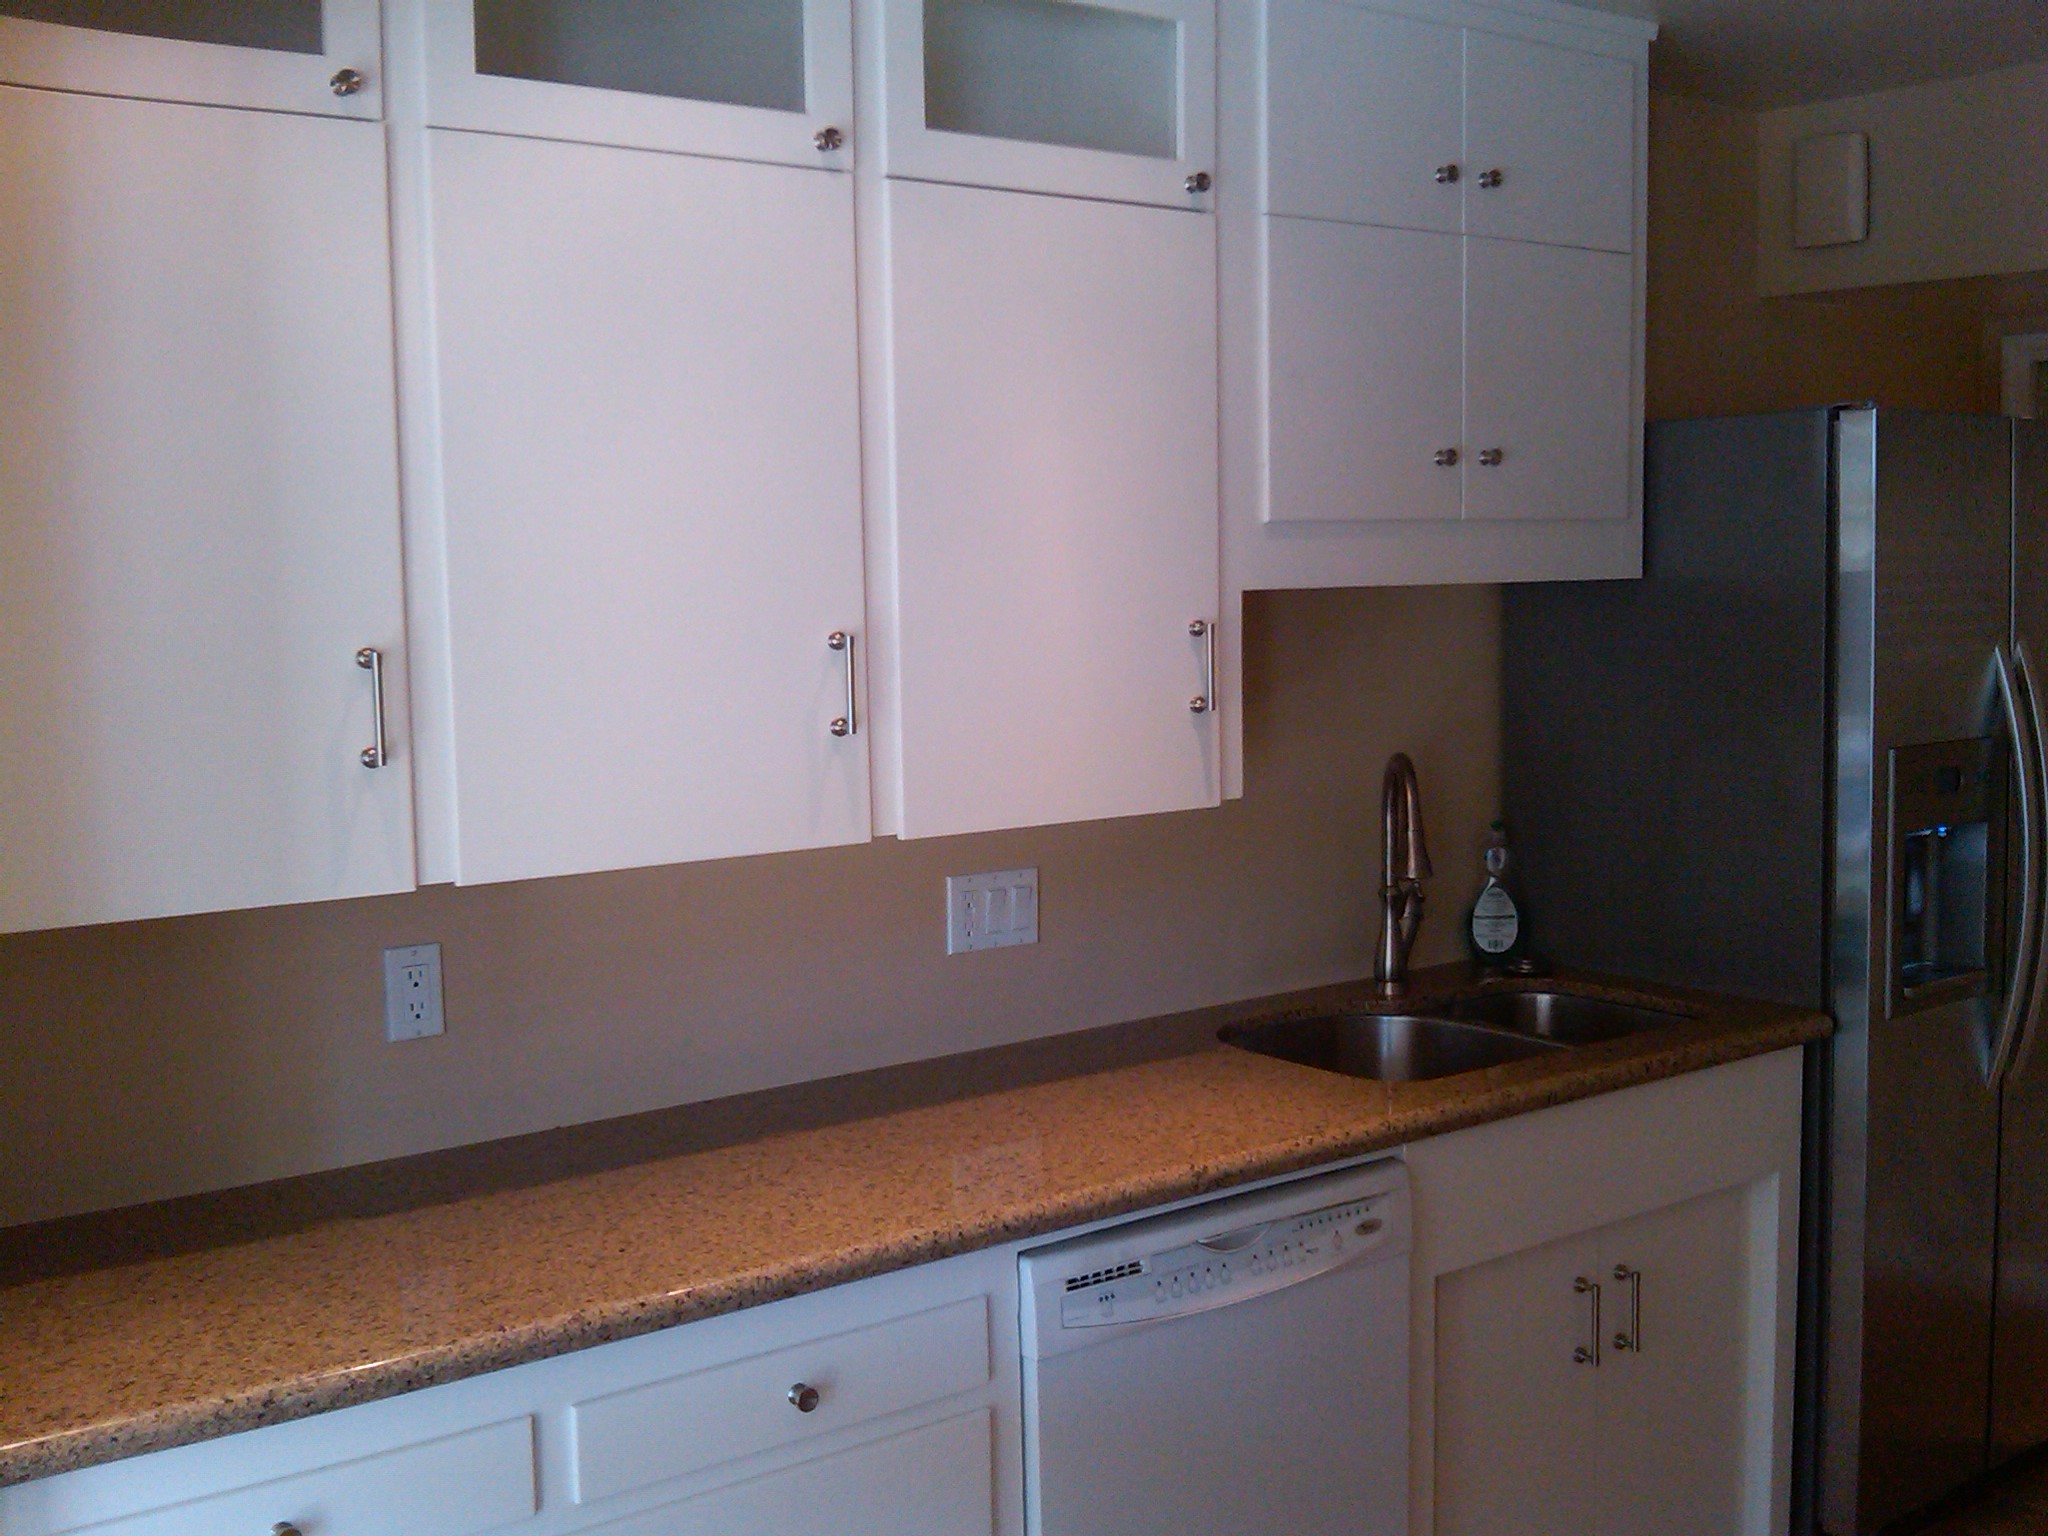 Repainting Old Kitchen Cabinets And Making A New One The